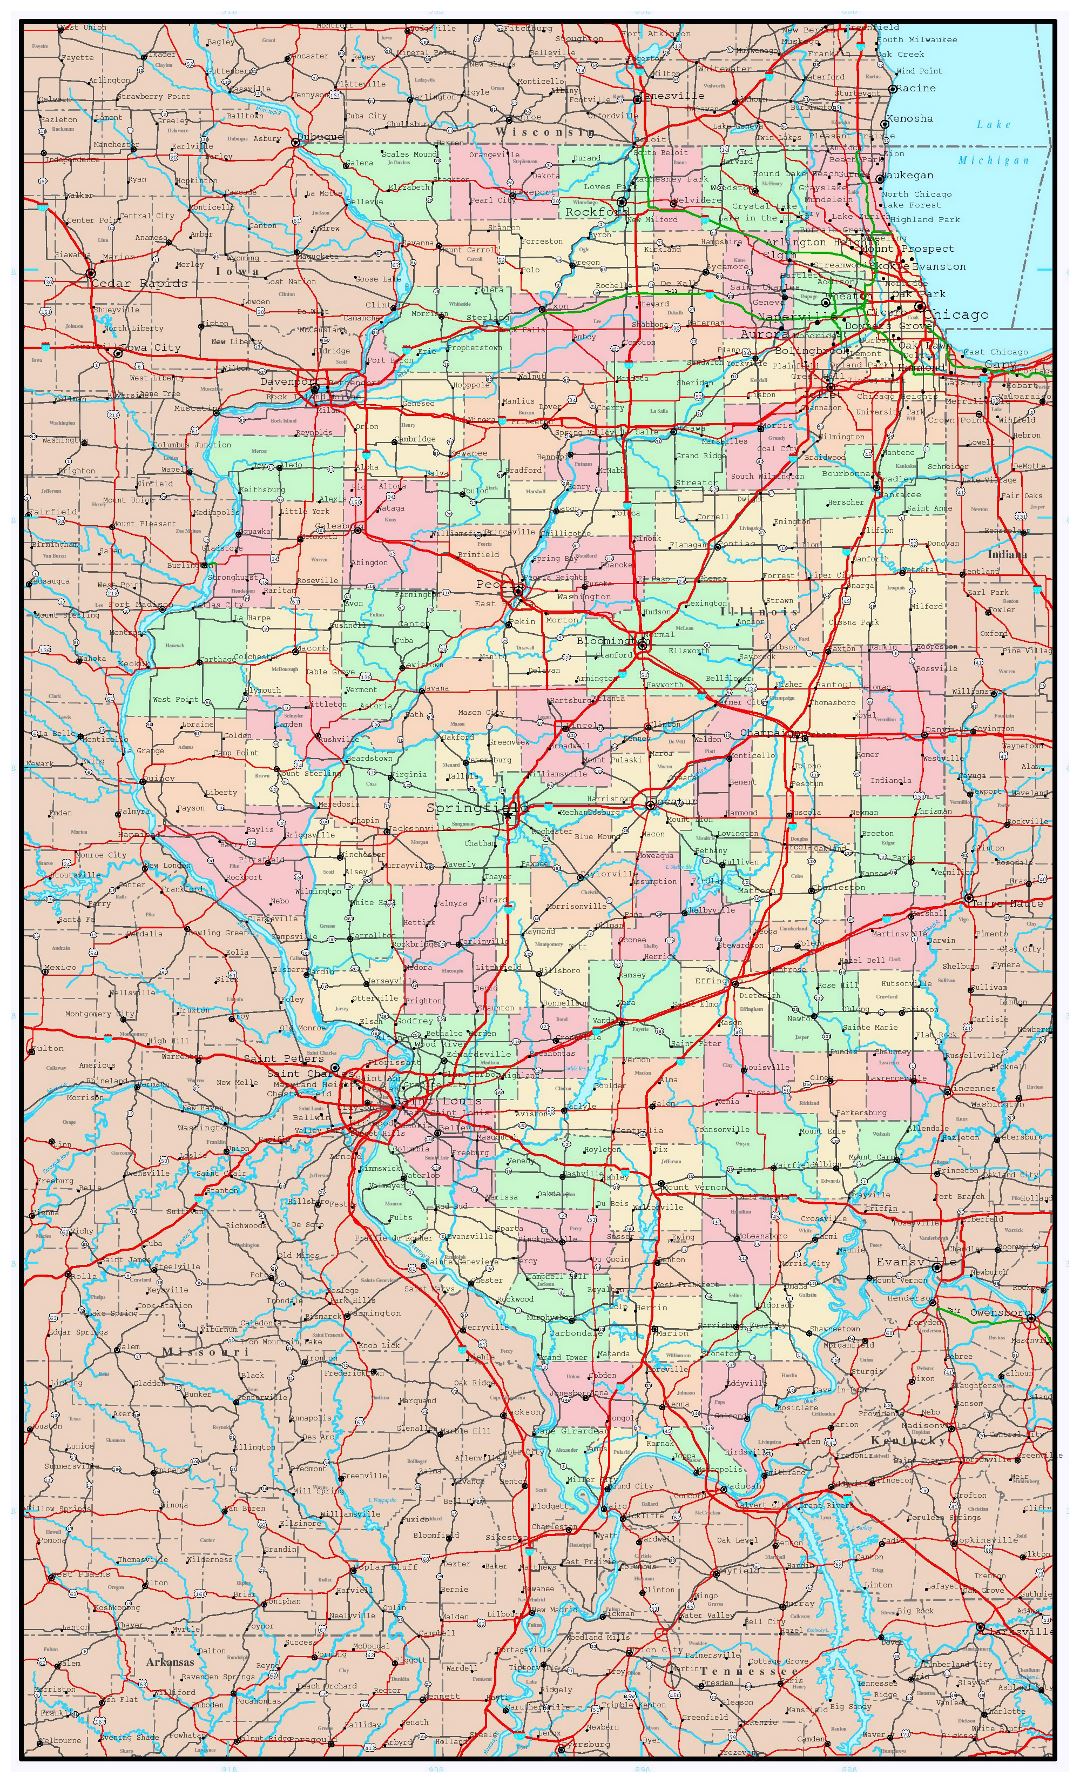 Large administrative map of Illinois state with roads, highways and major cities